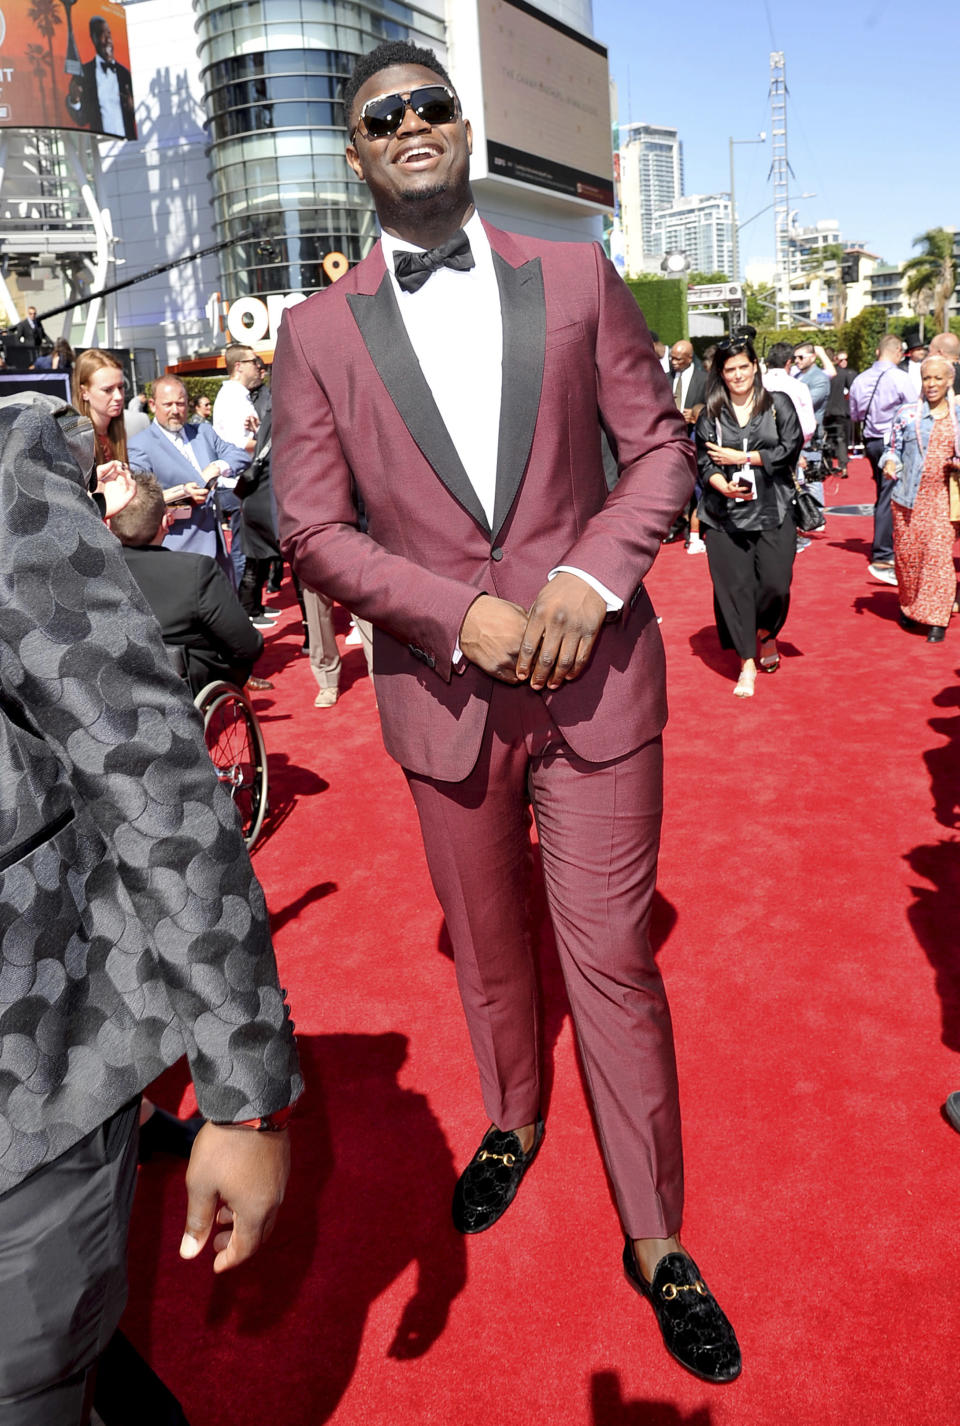 Zion Williamson, of the Duke University men's basketball team, arrives at the ESPY Awards on Wednesday, July 10, 2019, at the Microsoft Theater in Los Angeles. (Photo by Richard Shotwell/Invision/AP)